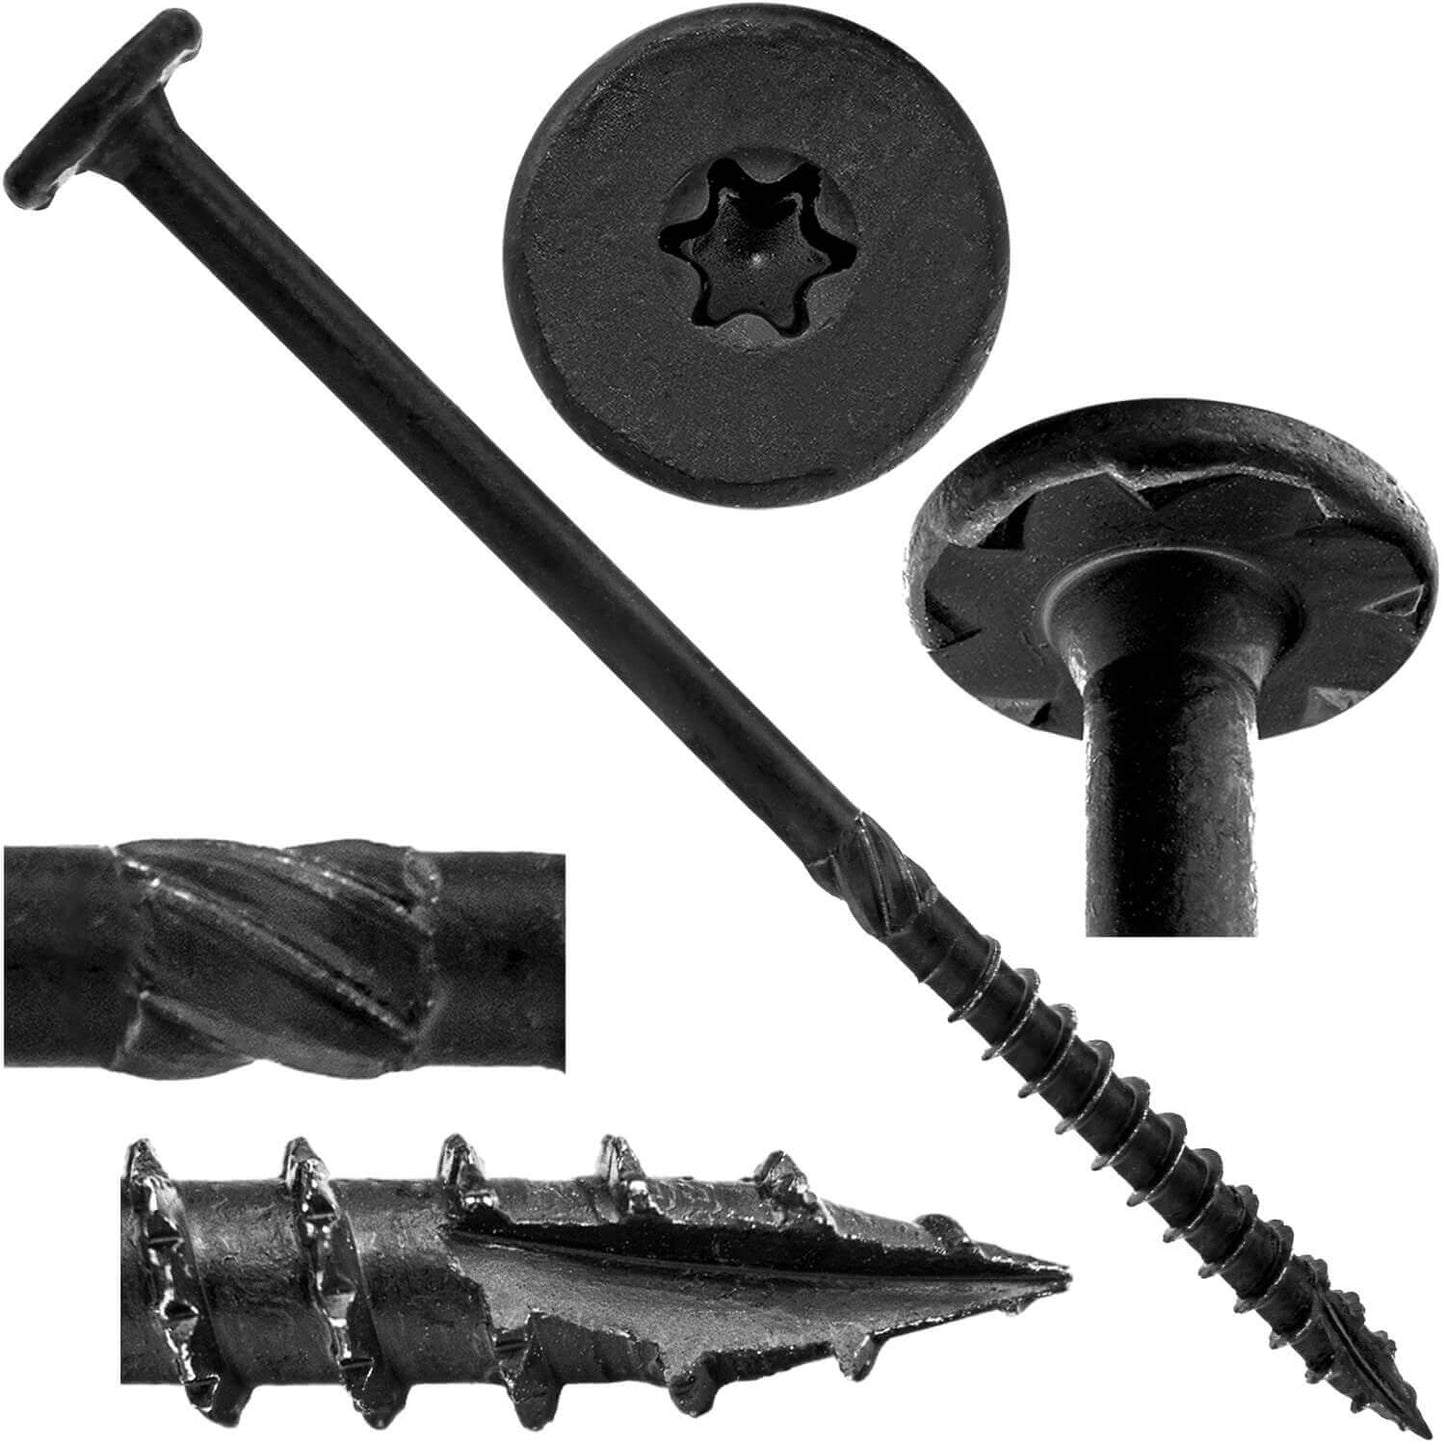 #15 Black Wafer Head Structural Lag Screws. Used for Log Construction, Timber Framing, Laminated Beams and Pole Barns Among Other Uses. T-30 Torx/Star Drive